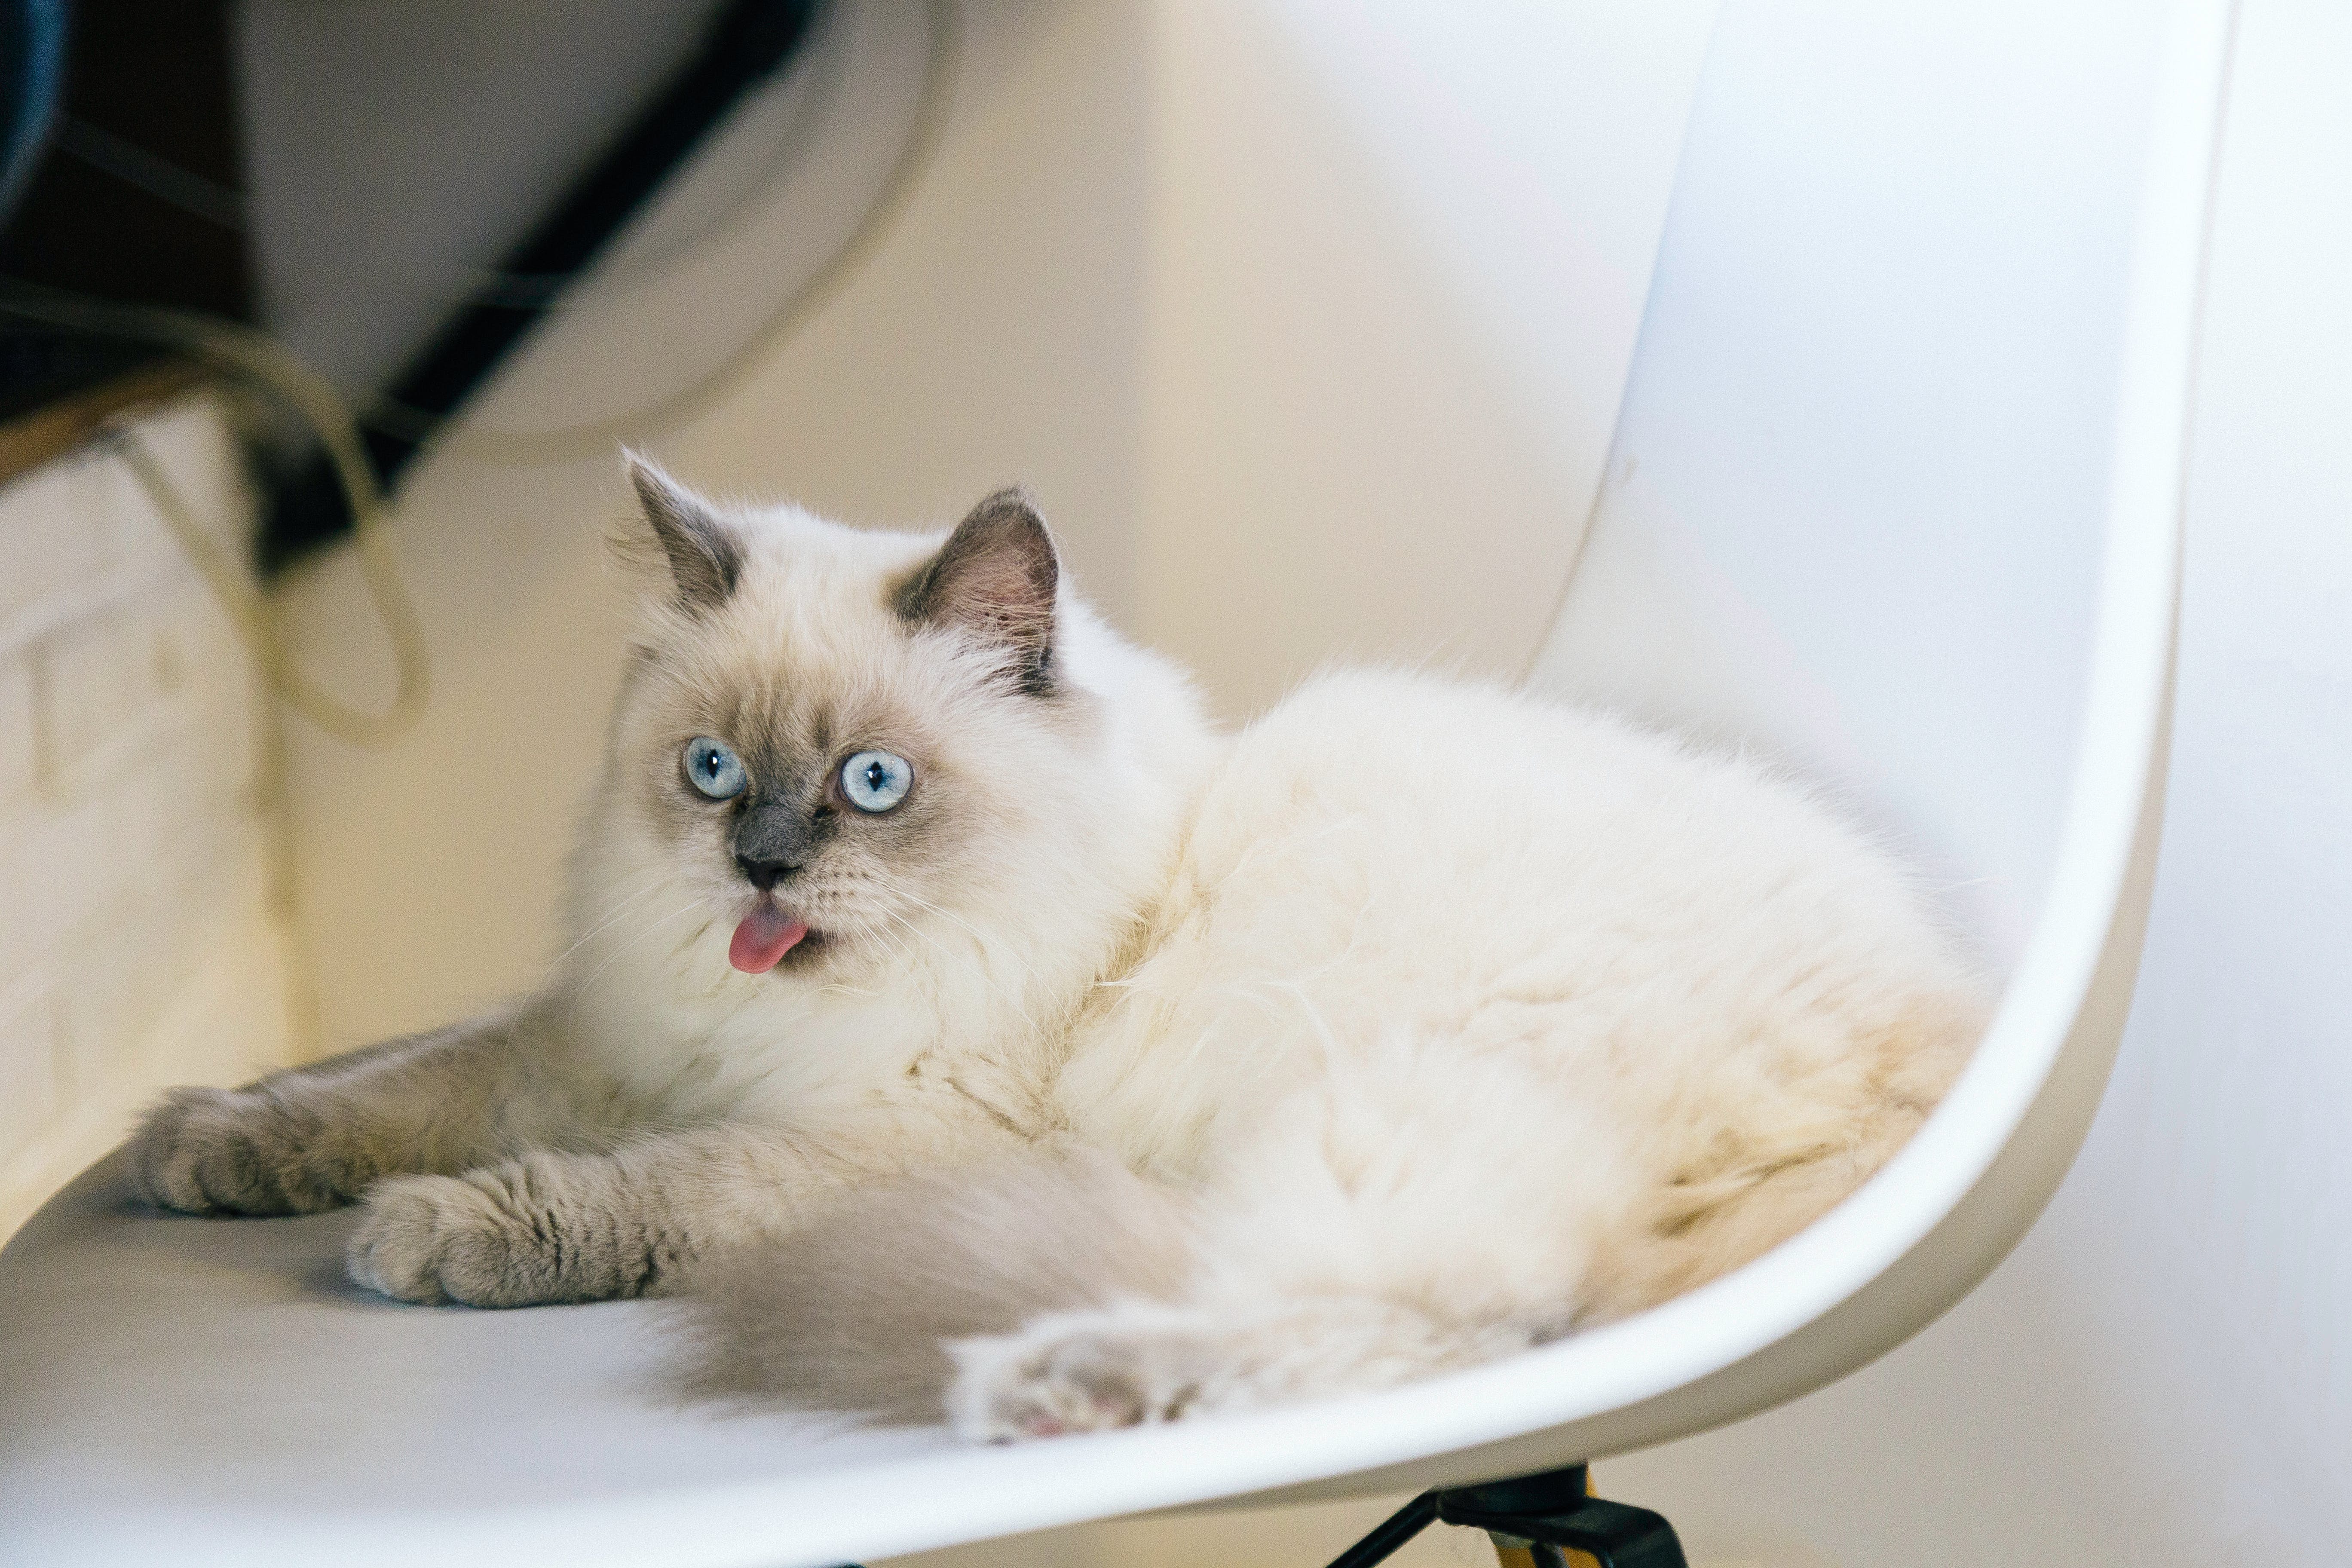 A white furred cat with blue eyes, sitting on a chair.